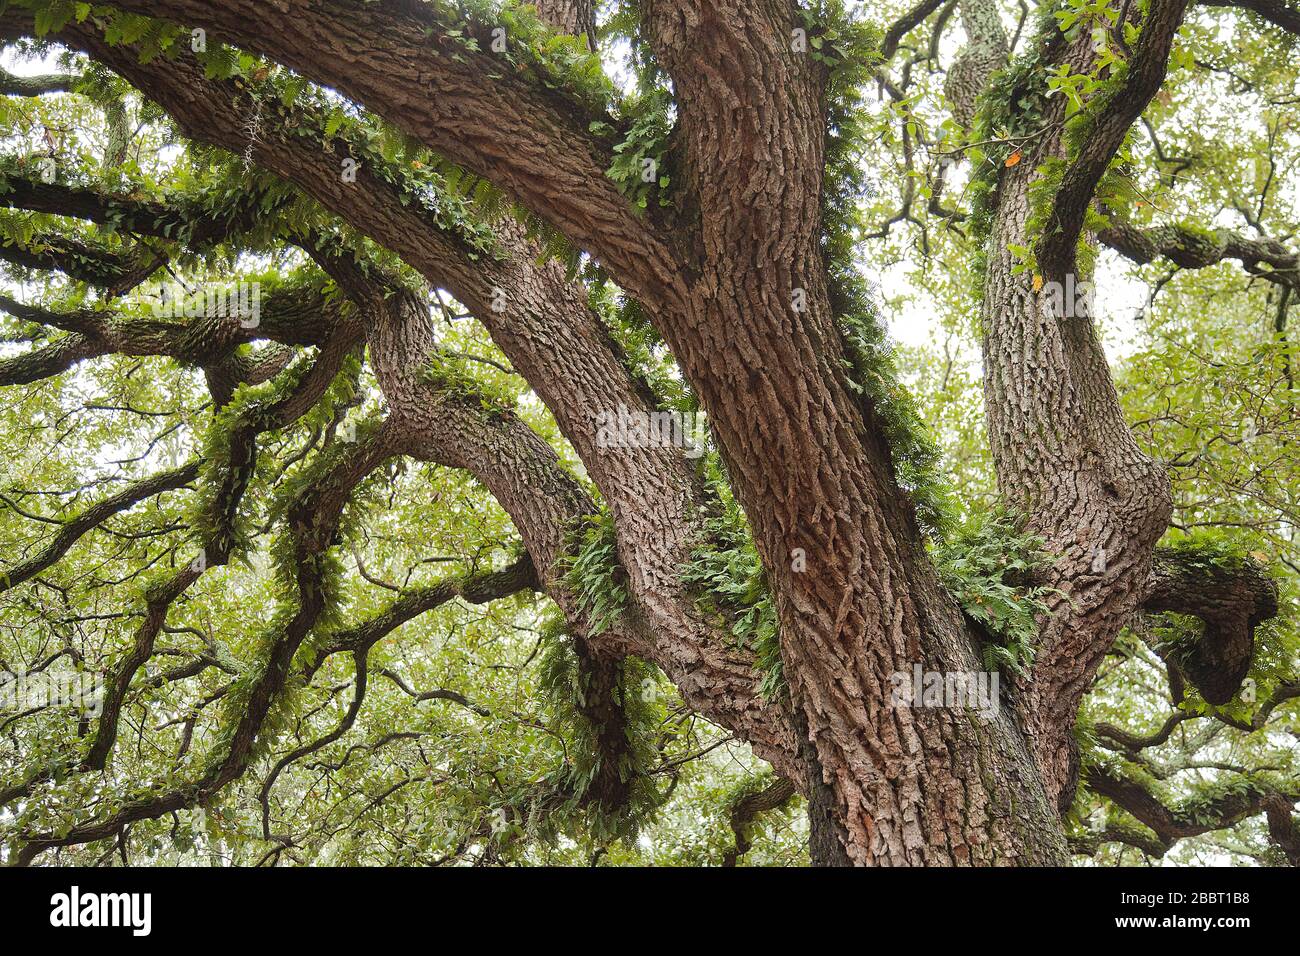 Spanish moss on beautiful crooked old live oak trees in the old streets of Savannah, Georgia, in the United States of America. Stock Photo